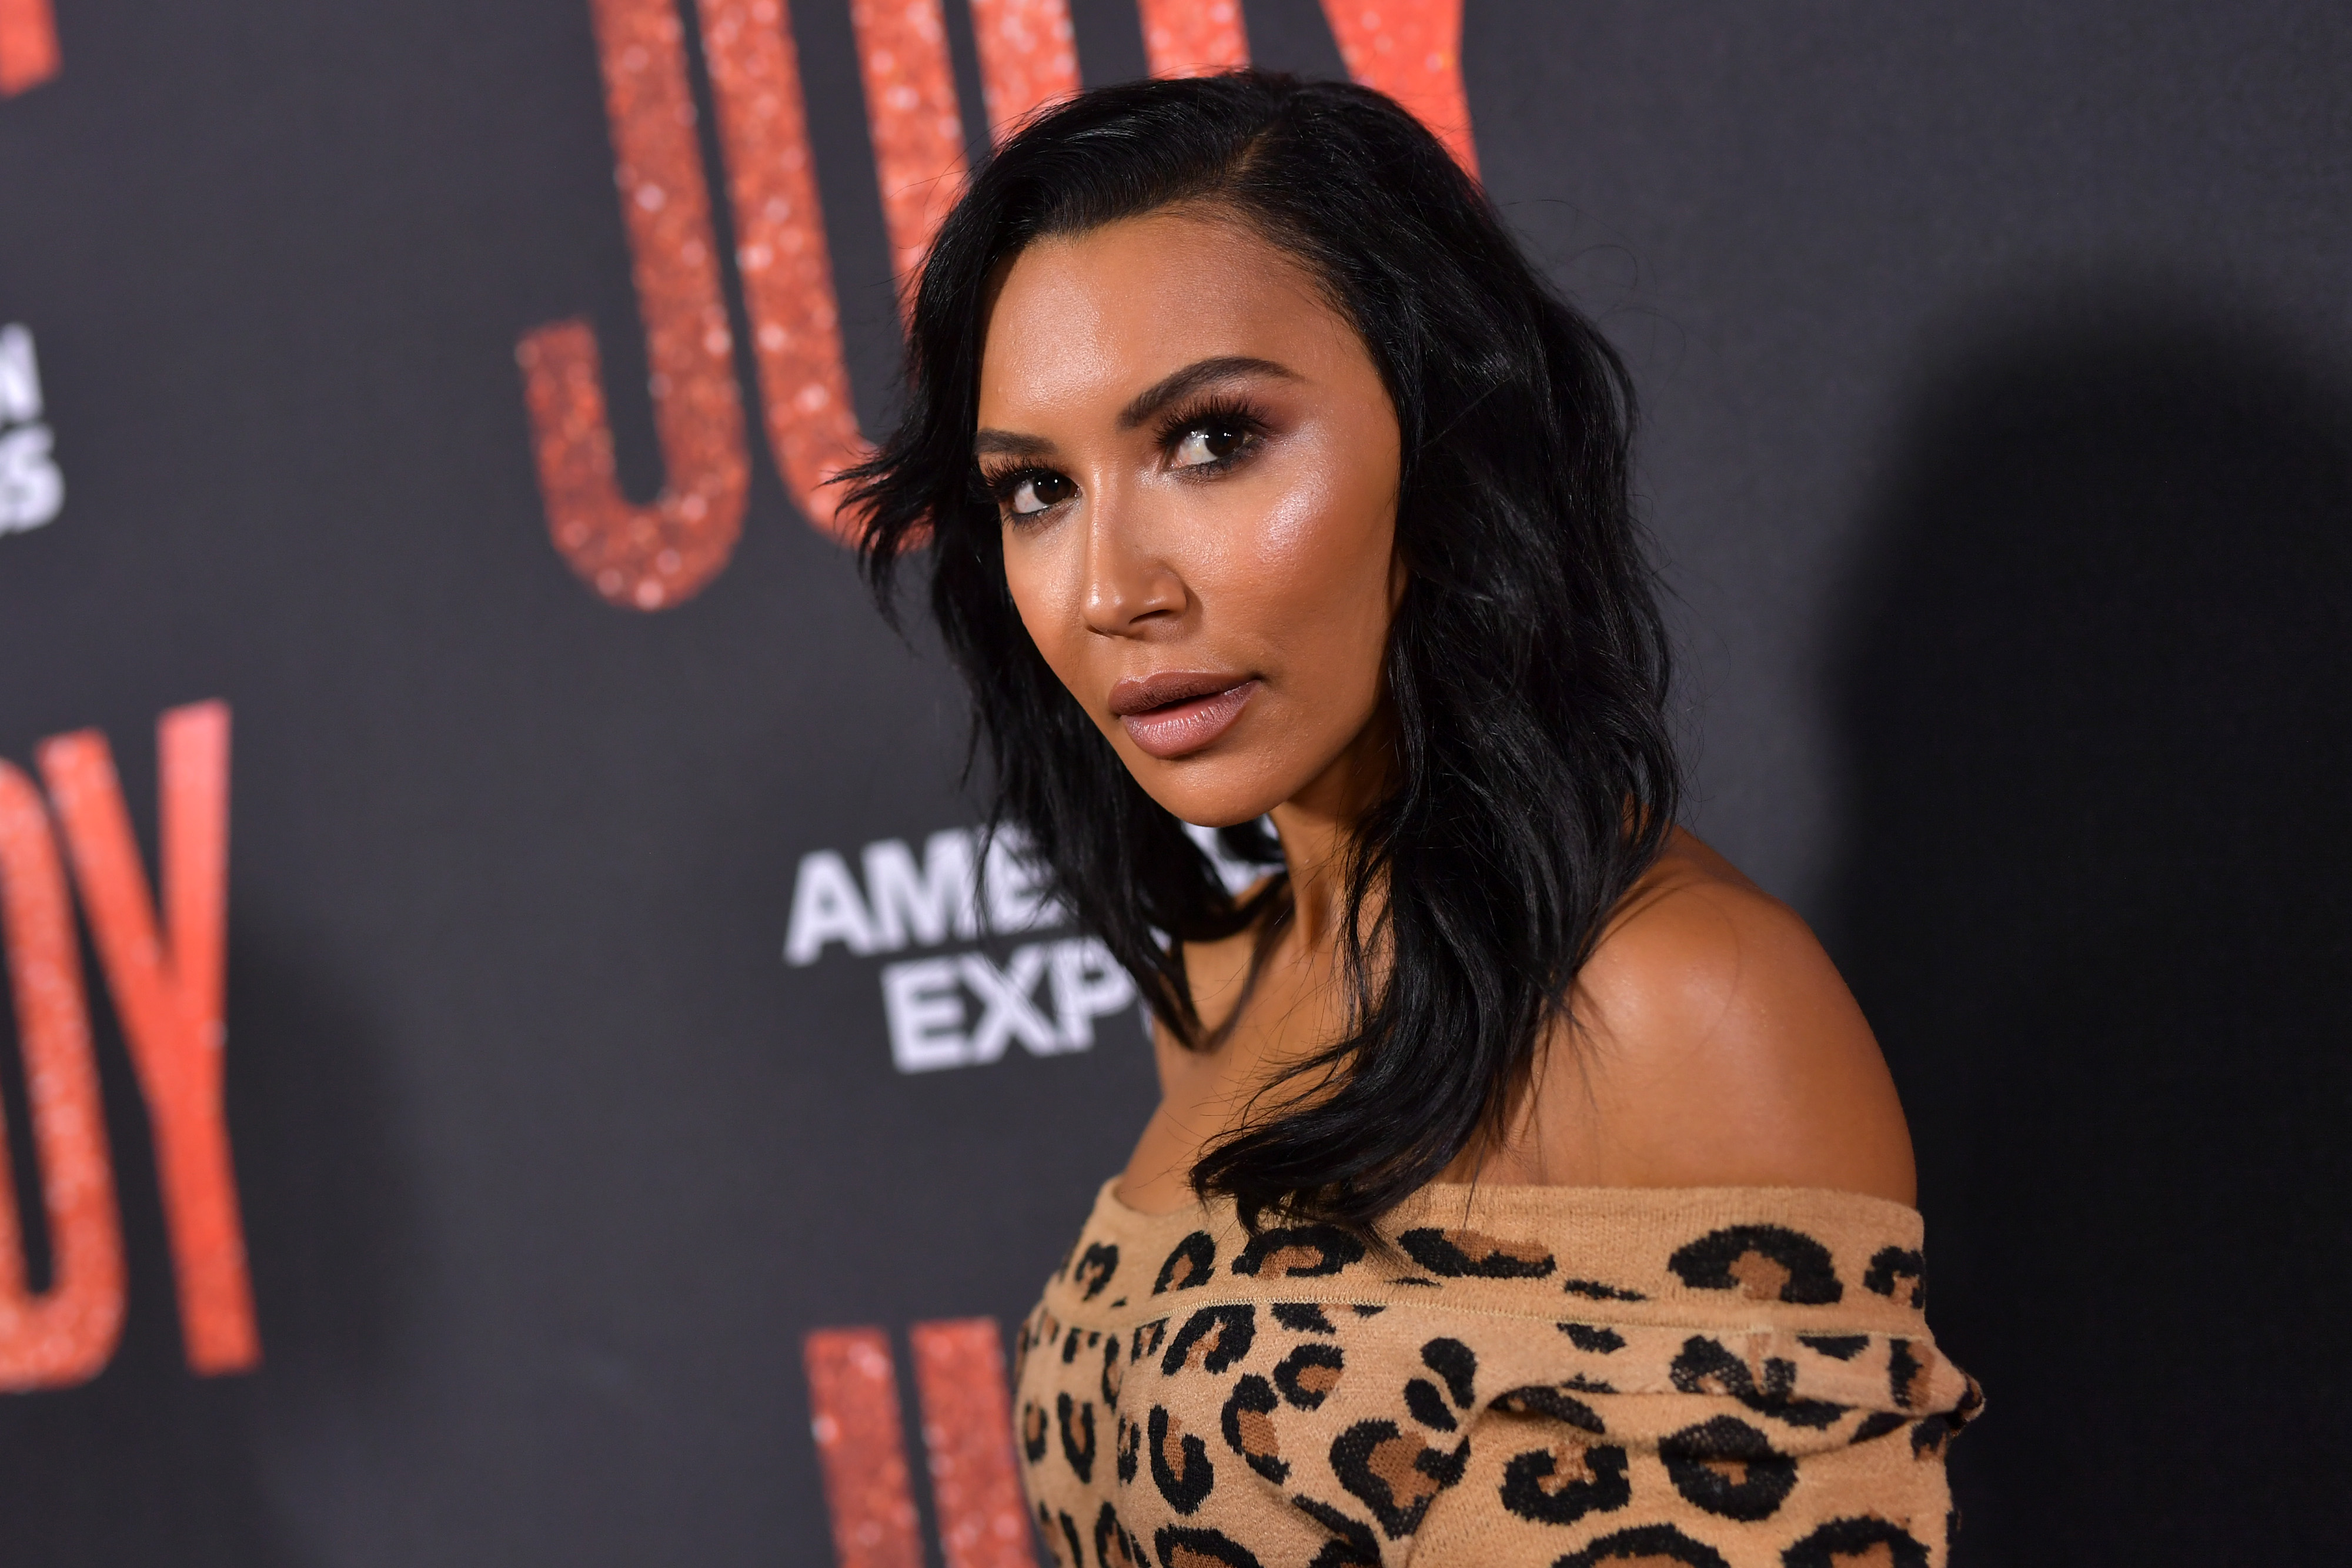 Naya Rivera “Mustered Enough Energy” To Save Son, But Not Herself: Sheriff